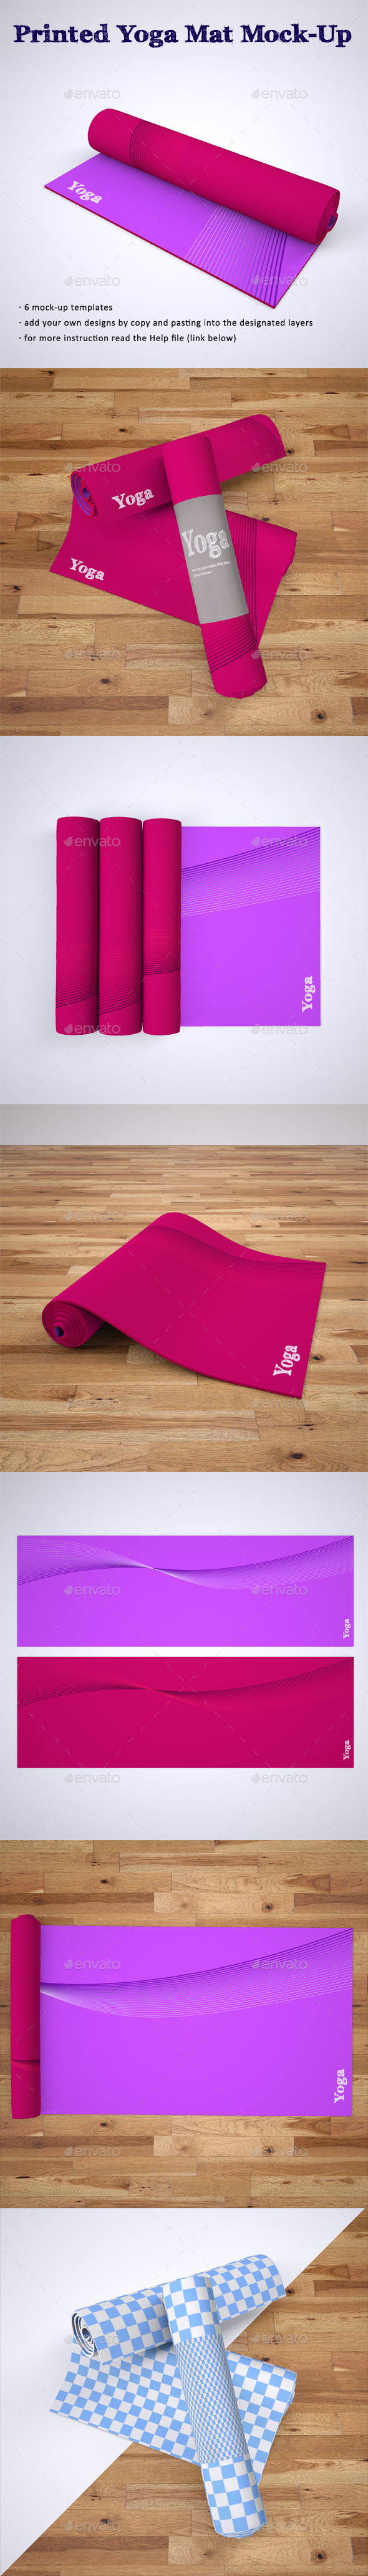 Download Stock Graphic - GraphicRiver Printed Yoga Mat Exercise Rug Mock-Up 20524317 » Dondrup.com